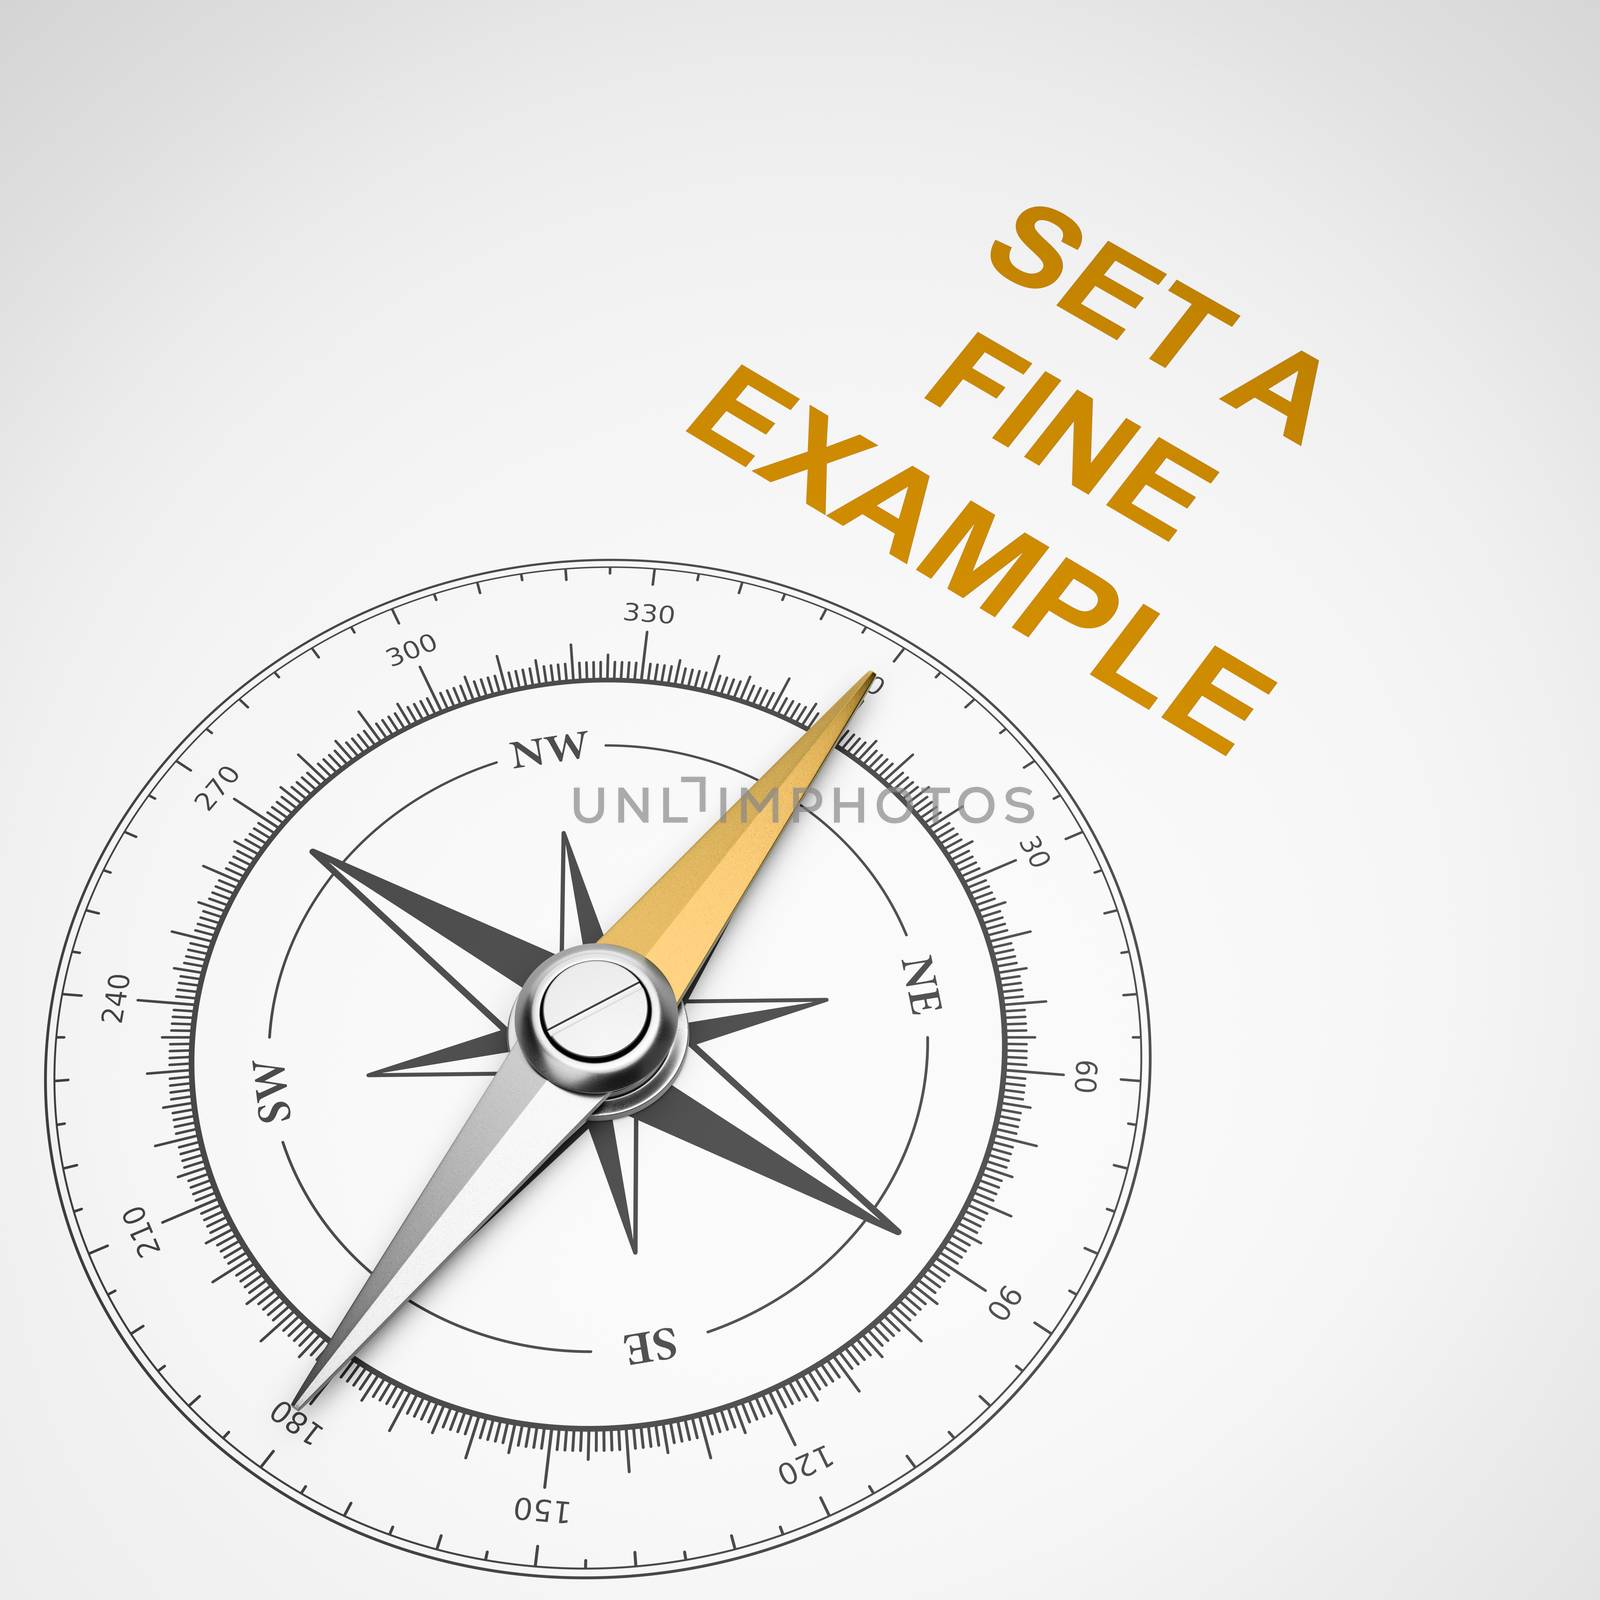 Magnetic Compass with Needle Pointing Orange Set a Fine Example Text on White Background 3D Illustration